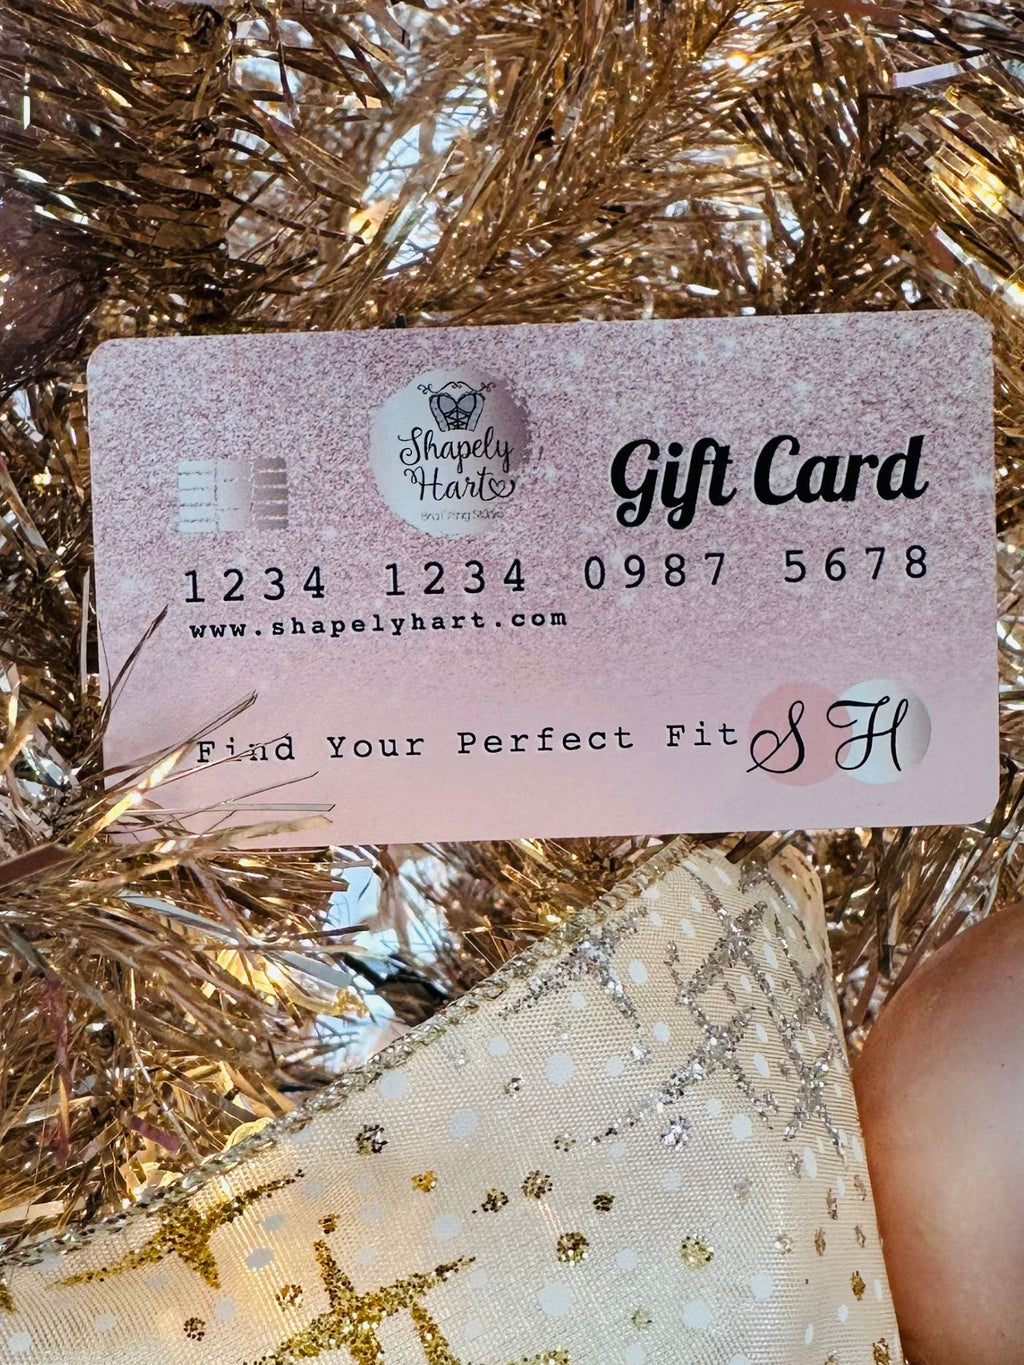 Shapely Hart Gift Card